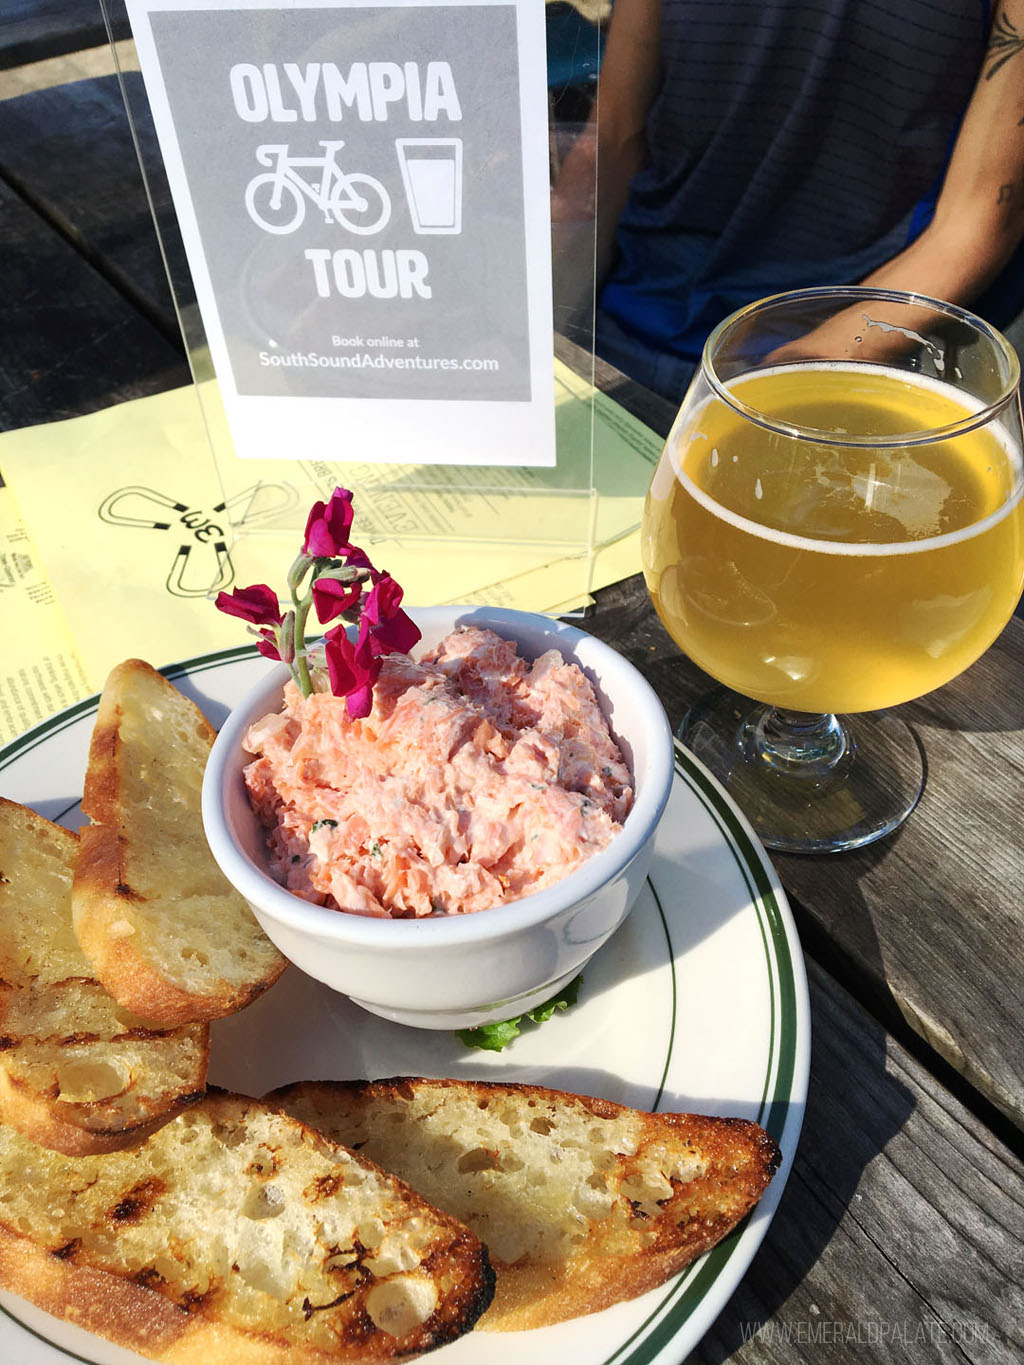 salmon dip and beer on a bike tour in Olympia WA